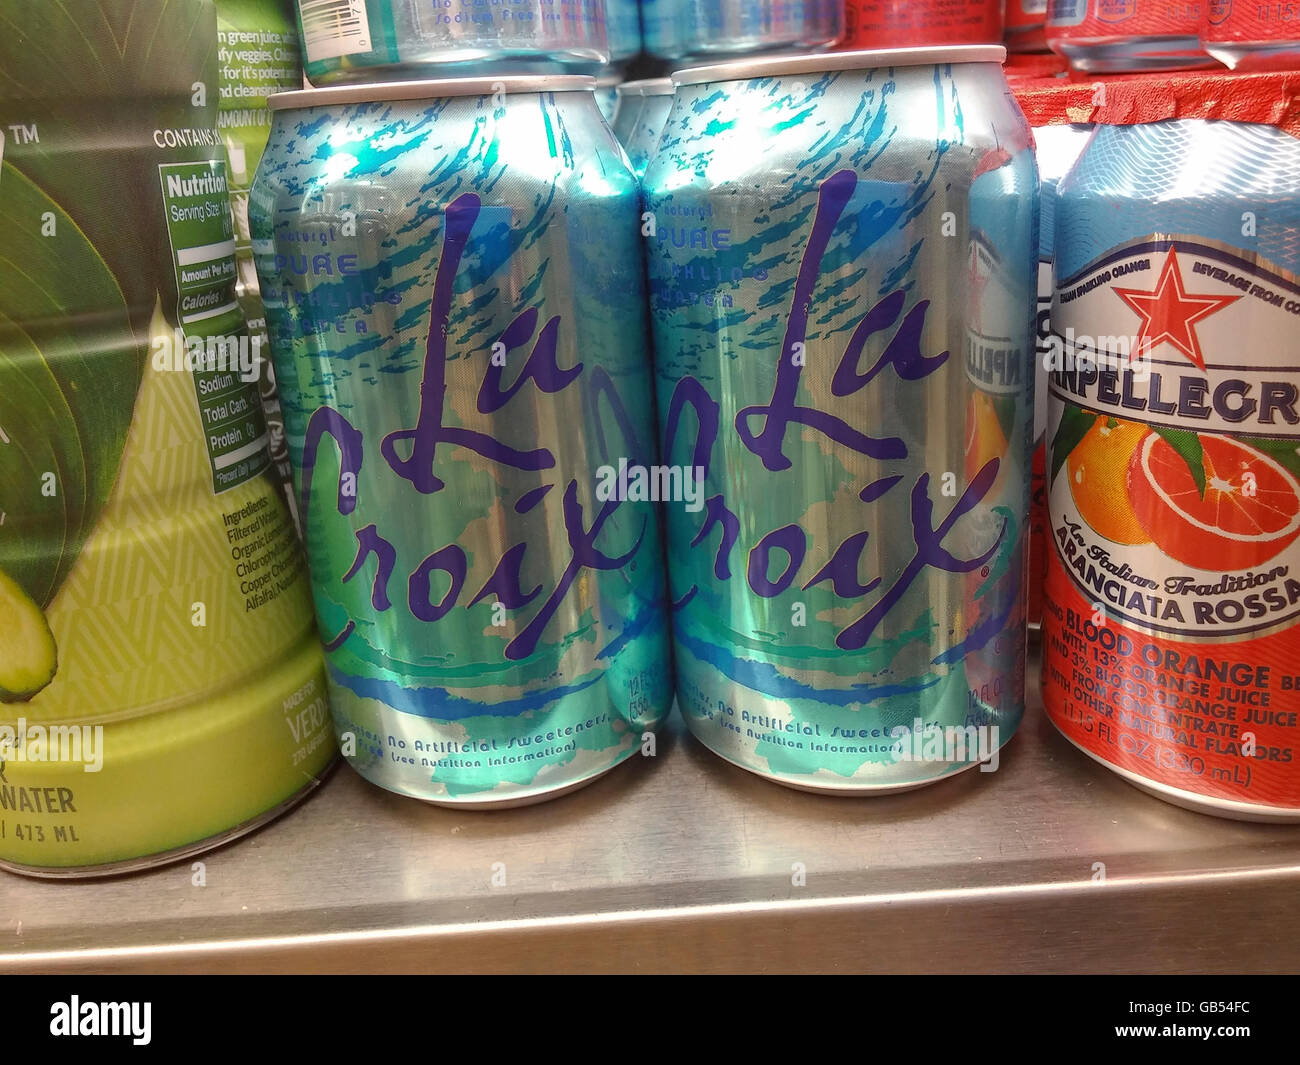 Cans of LaCroix sparkling water in a deli in New York on Monday, July 4, 2016. LaCroix eschews traditional advertising instead relying on their manipulation of social media to attract their millennial demographic. Sales have gone from $65 million in 2010 to $226 million in 2015 making it the number brand of flavored sparkling water in the U.S. (© Richard B. Levine) Stock Photo